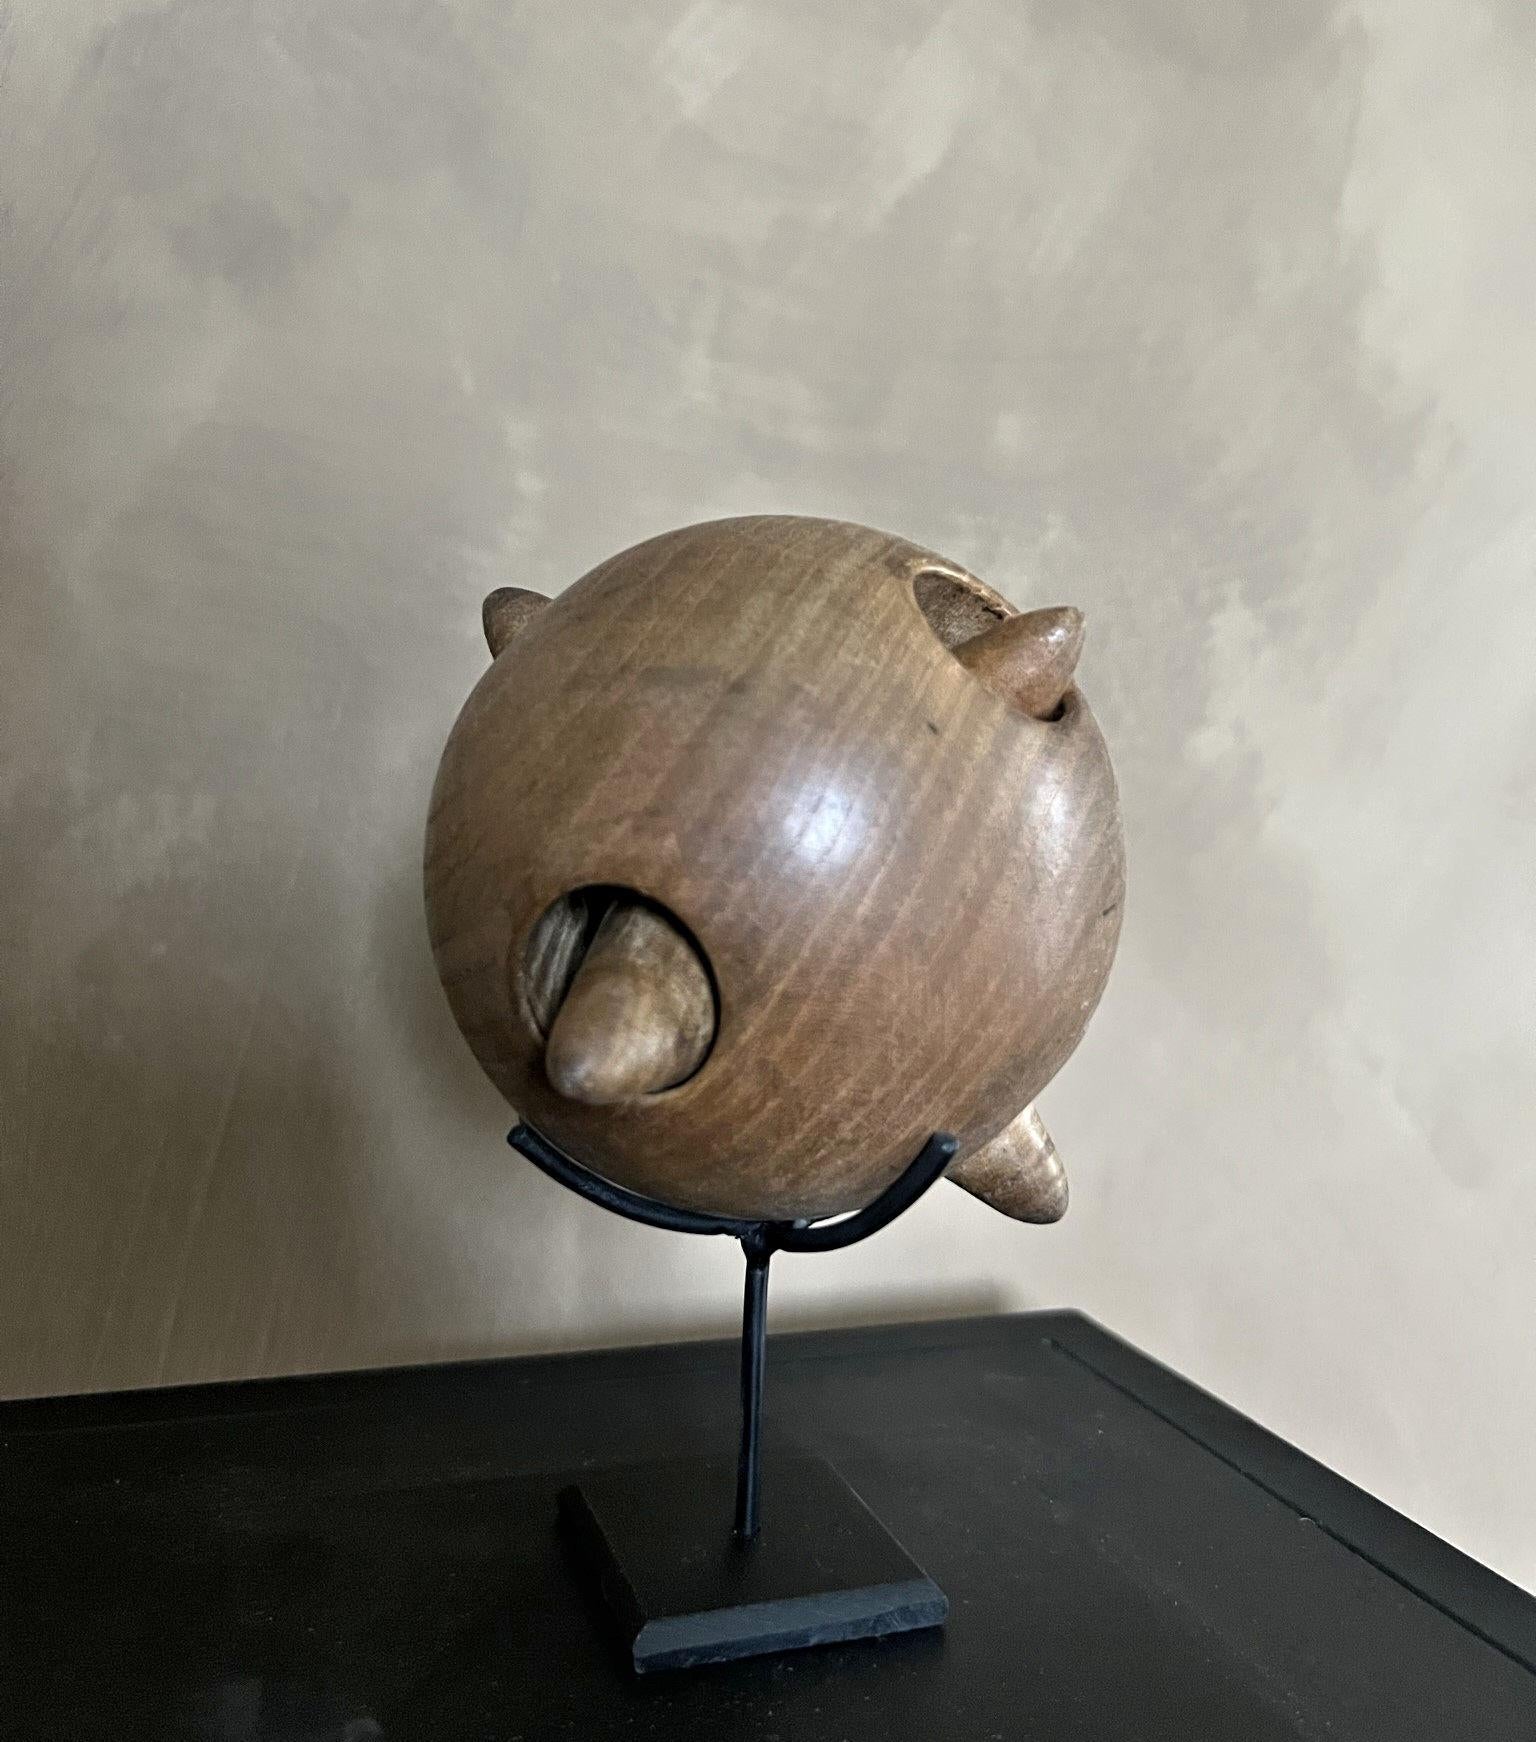 A beautifully turned maplewood sphere containg a second star shaped sphere. Objects like these find their origins in the 16th century when the interest in science, mathematics and arts were widely spread trough the first bookprints. Originally only